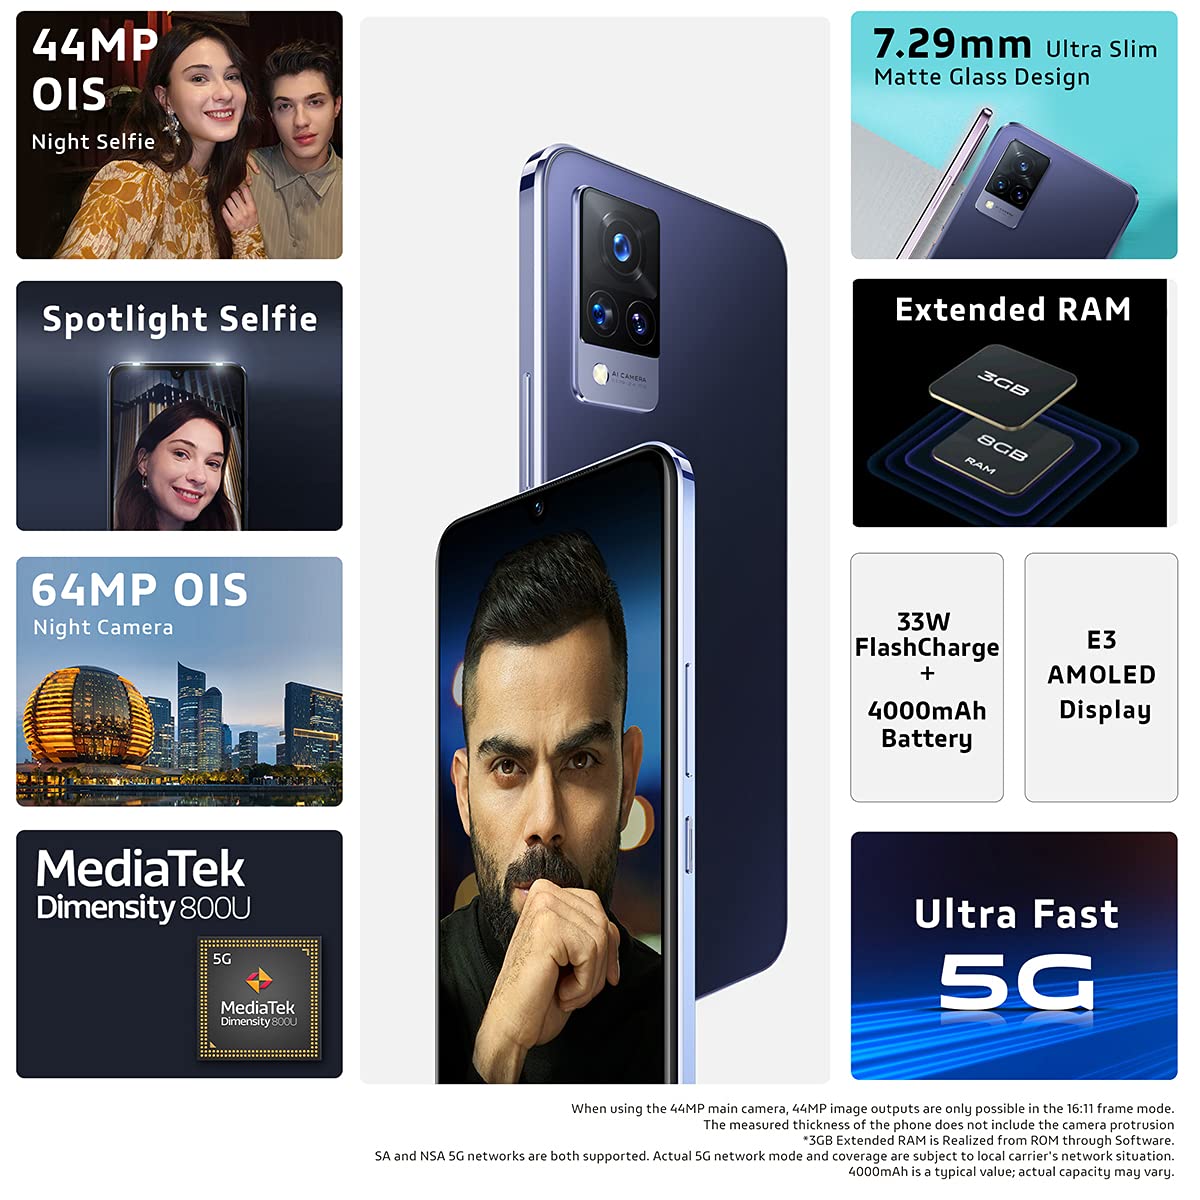 Amazon Festival Sale: Buy Samsung's 64MP camera phone for less than 15 thousand, hurry up, just 3 days left for the deal to end